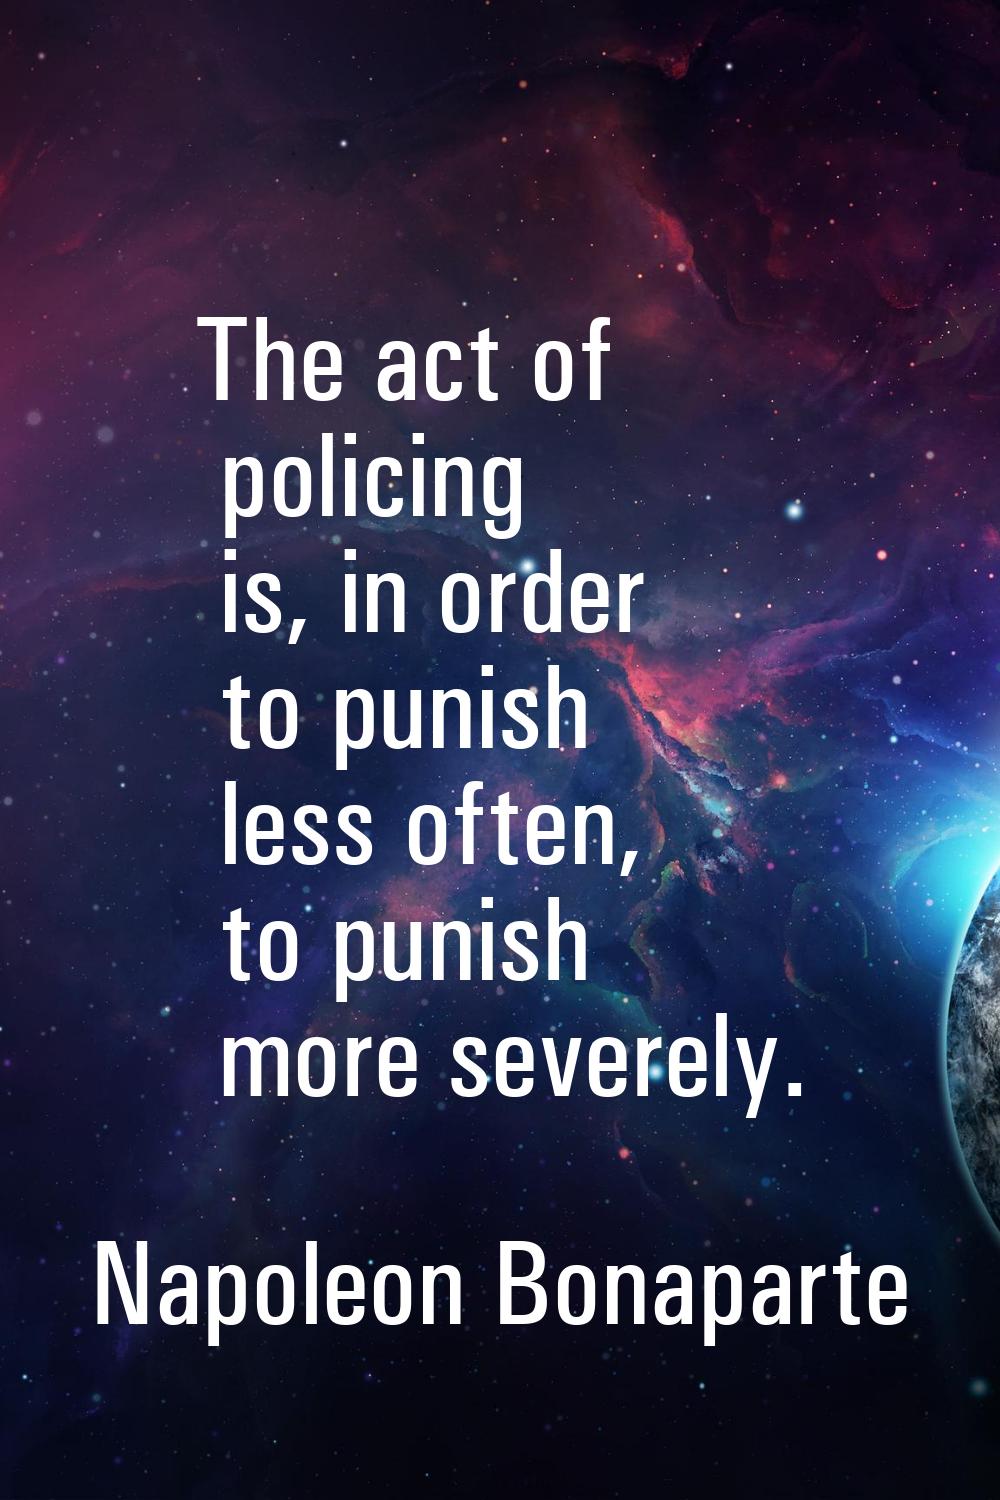 The act of policing is, in order to punish less often, to punish more severely.